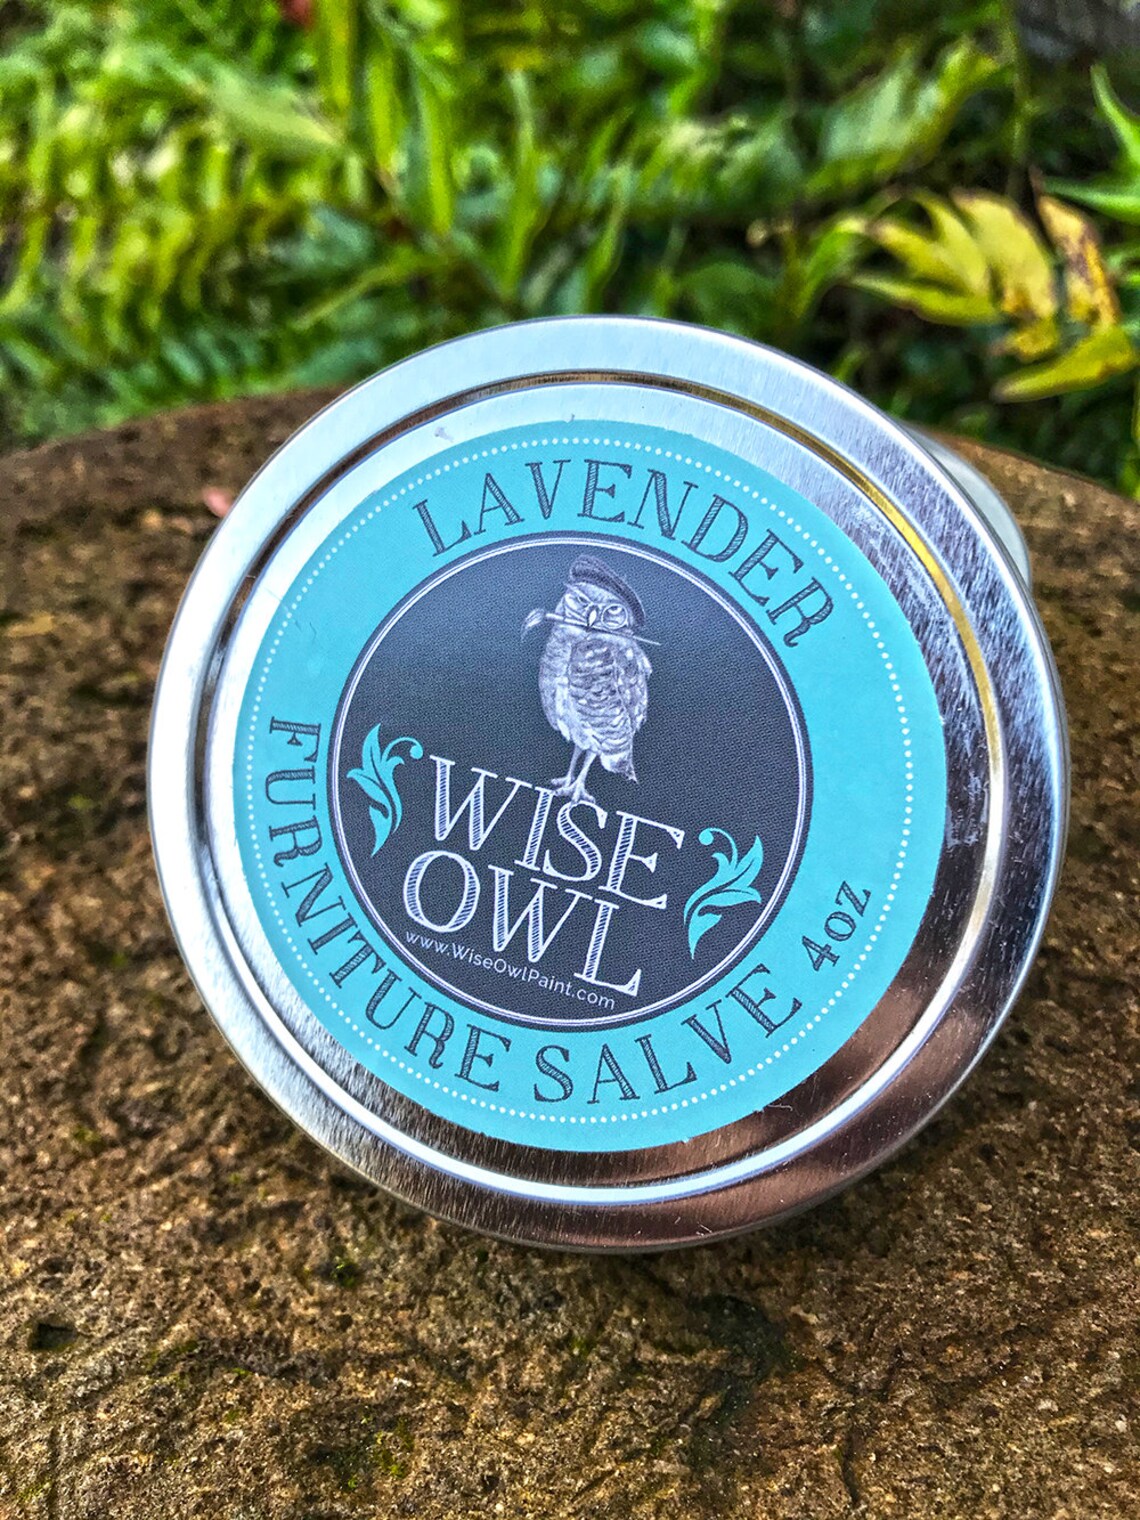 Free Shipping Furniture Salve Wise Owl Salve Wise Owl Paint | Etsy